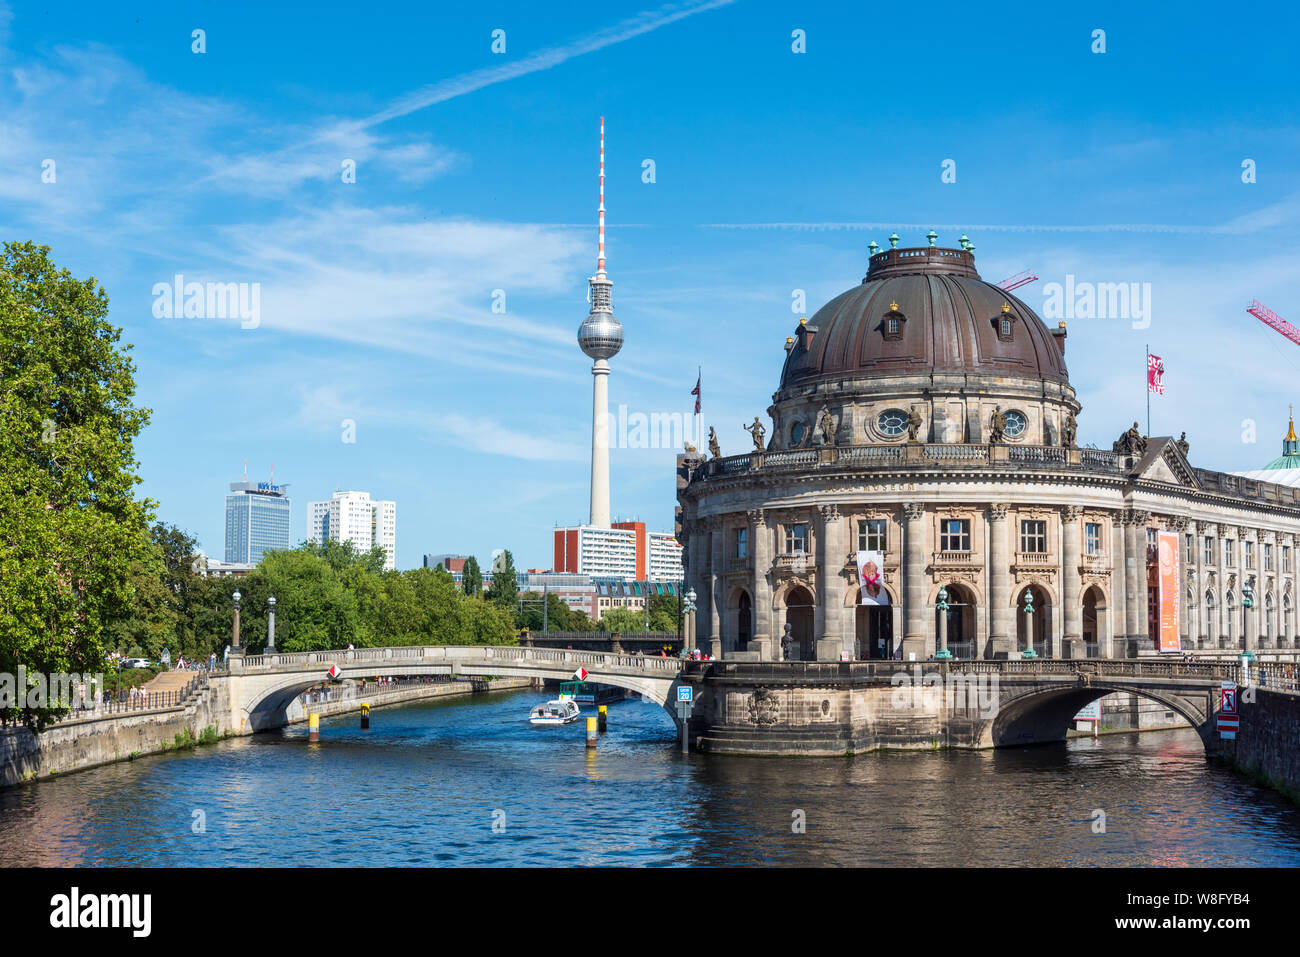 Berlin skyline with Museumsinsel, Spree river and Alexanderplatz television tower Stock Photo